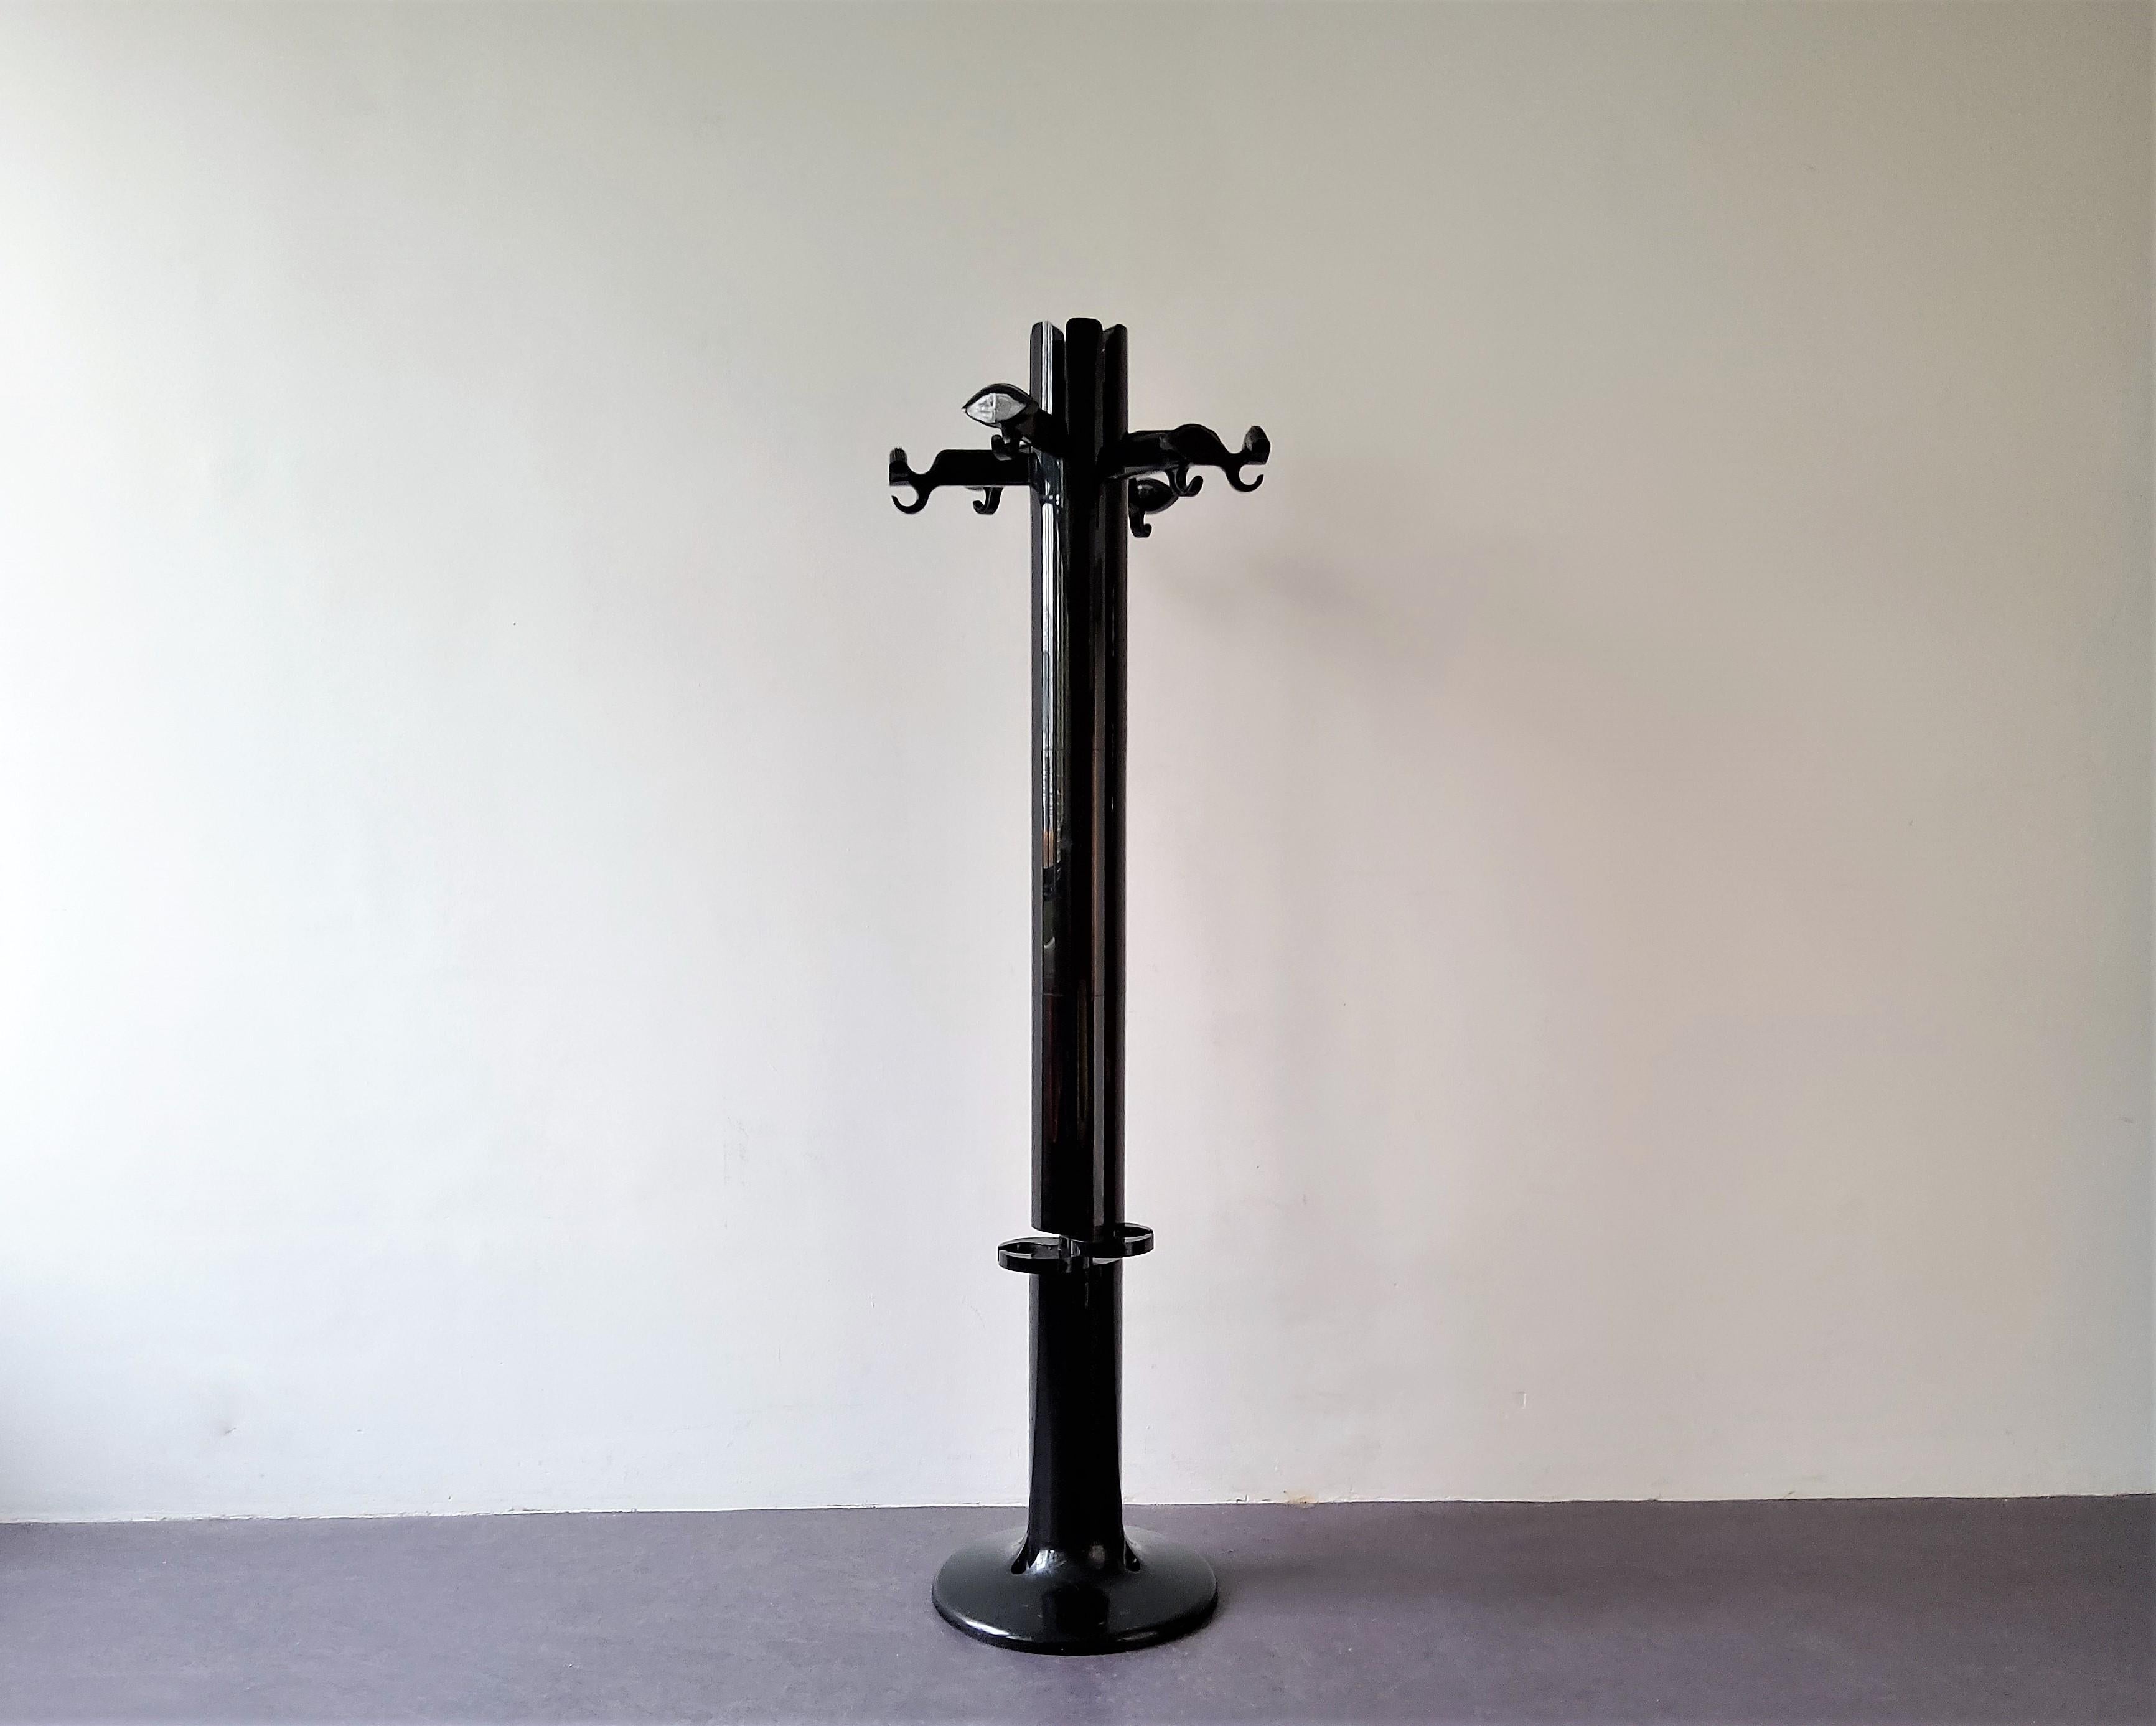 This coat stand, named Planta, was designed by Giancarlo Piretti for Anonima Castelli in the 1970's. It is made out of black plastic and has a heavy base for a good stability. It has six foldable hooks and two extendable rings with little drains for